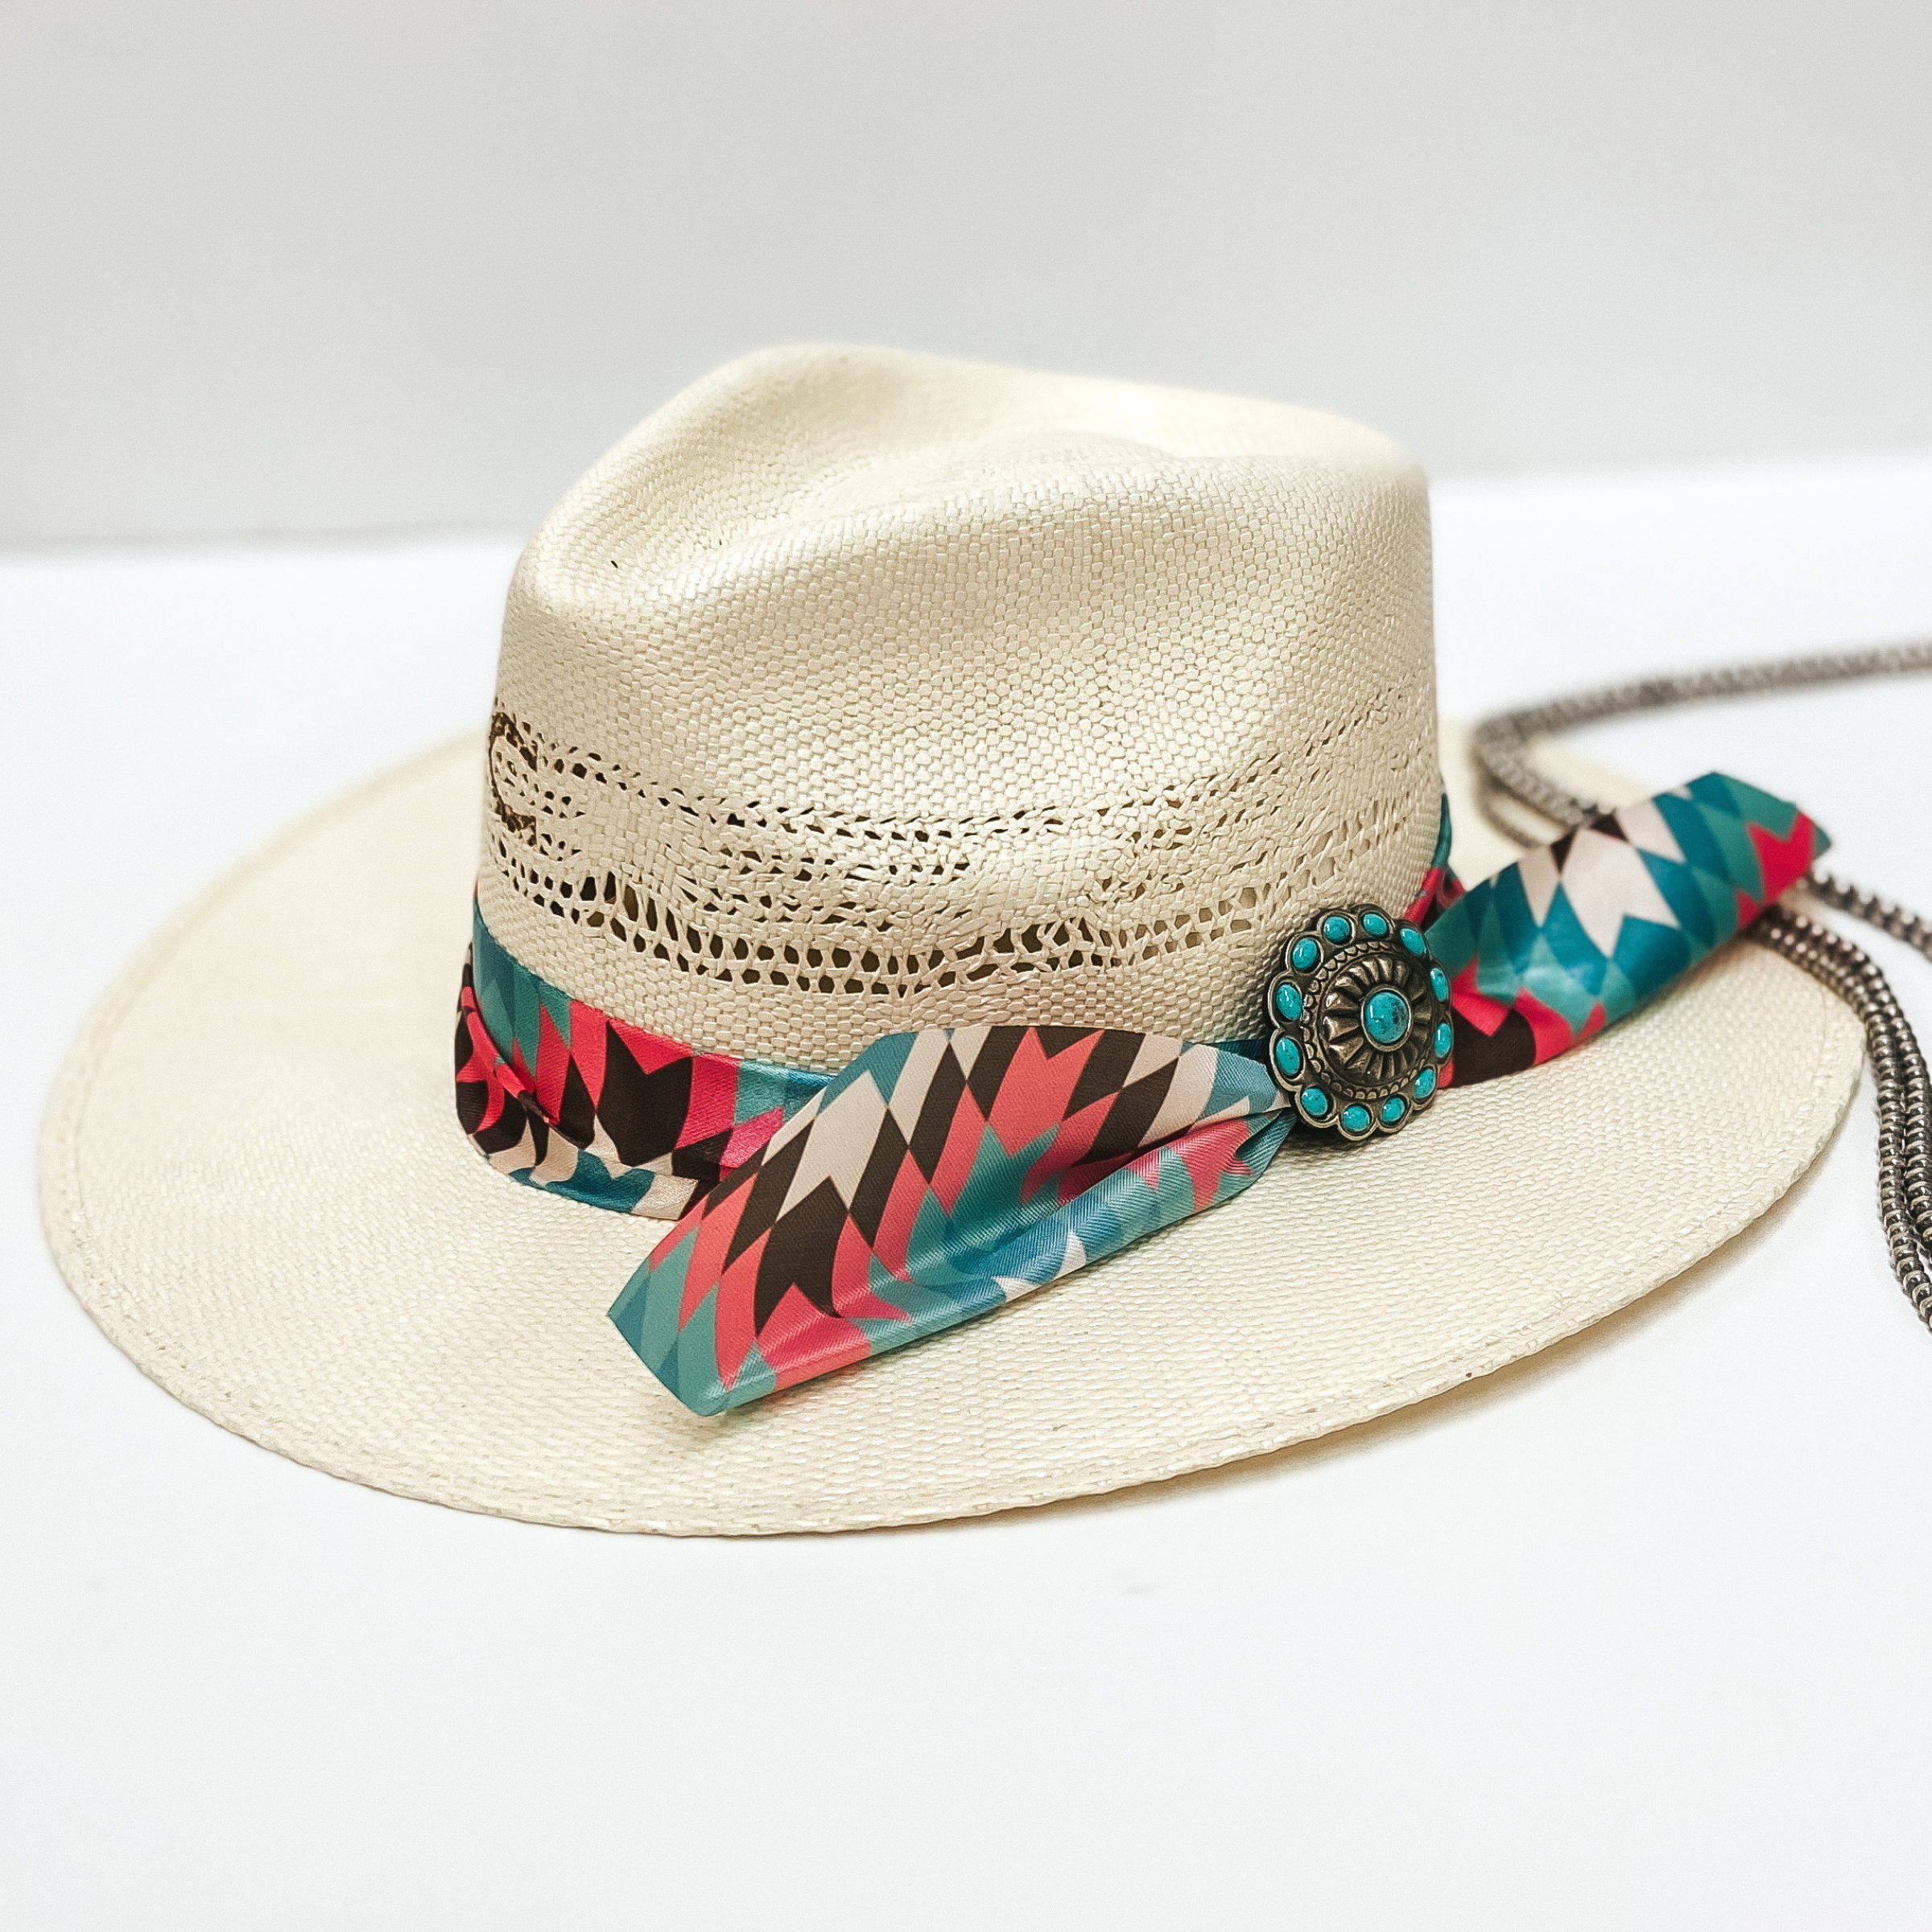 A light beige straw hat with a turquoise and pink ribbon band and a turquoise and silver concho. Pictured on white background with navajo pearls.